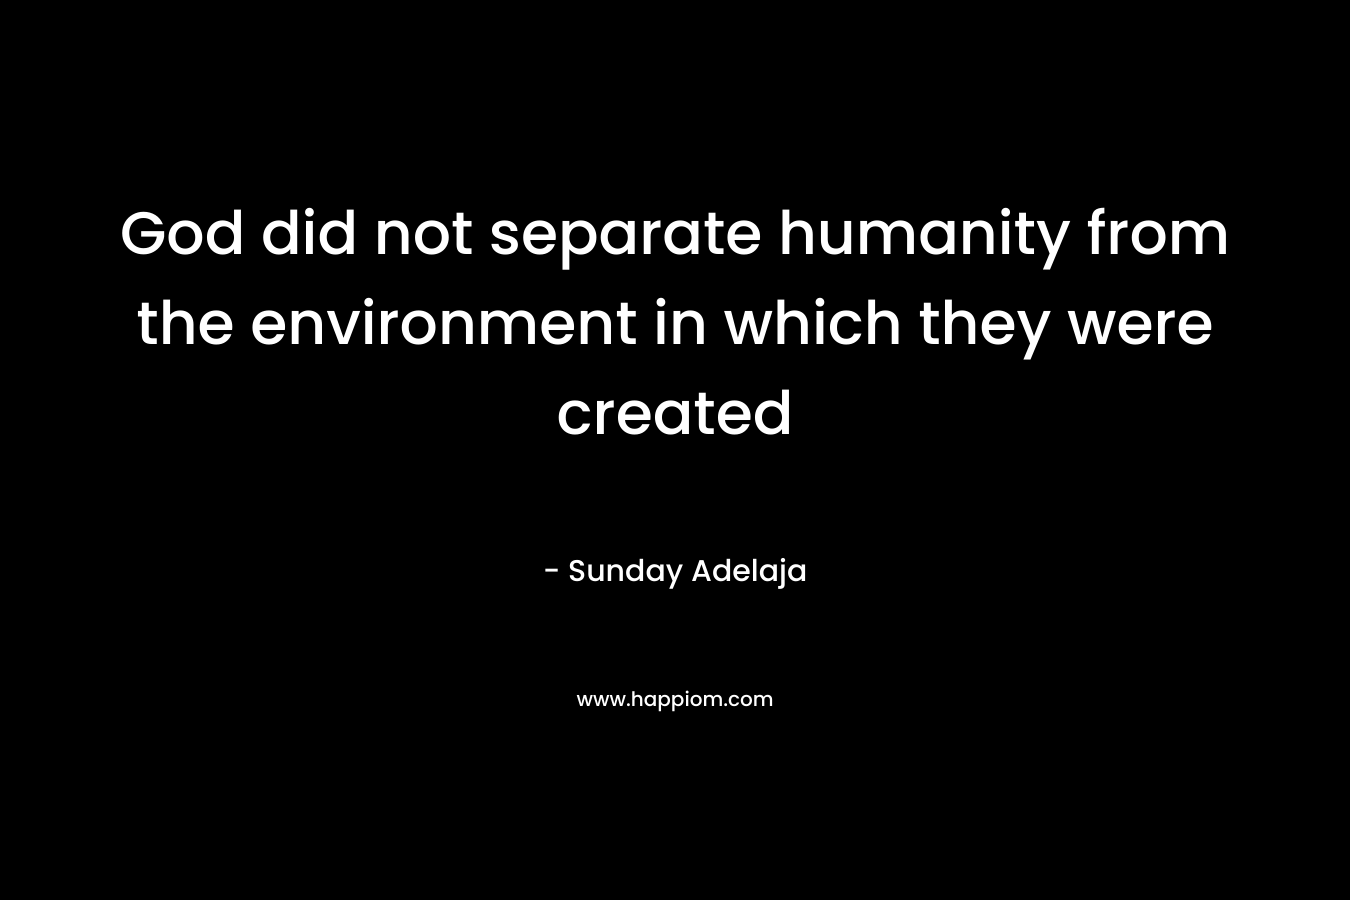 God did not separate humanity from the environment in which they were created